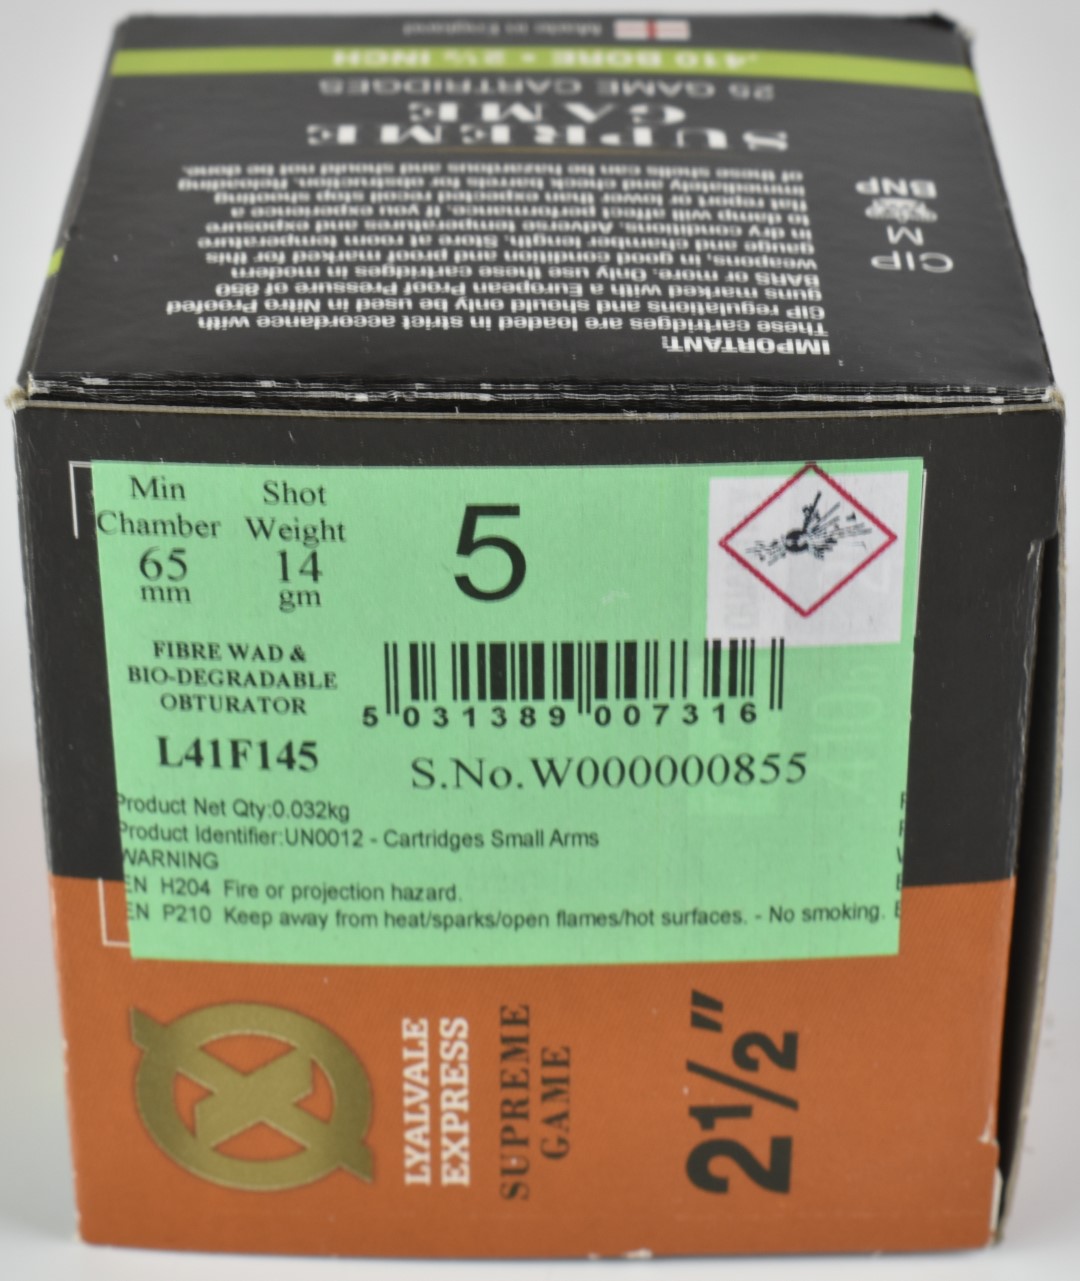 Five-hundred-and-fifty .410 Lyalvale Express shotgun cartridges, all in original boxes PLEASE NOTE - Image 9 of 14